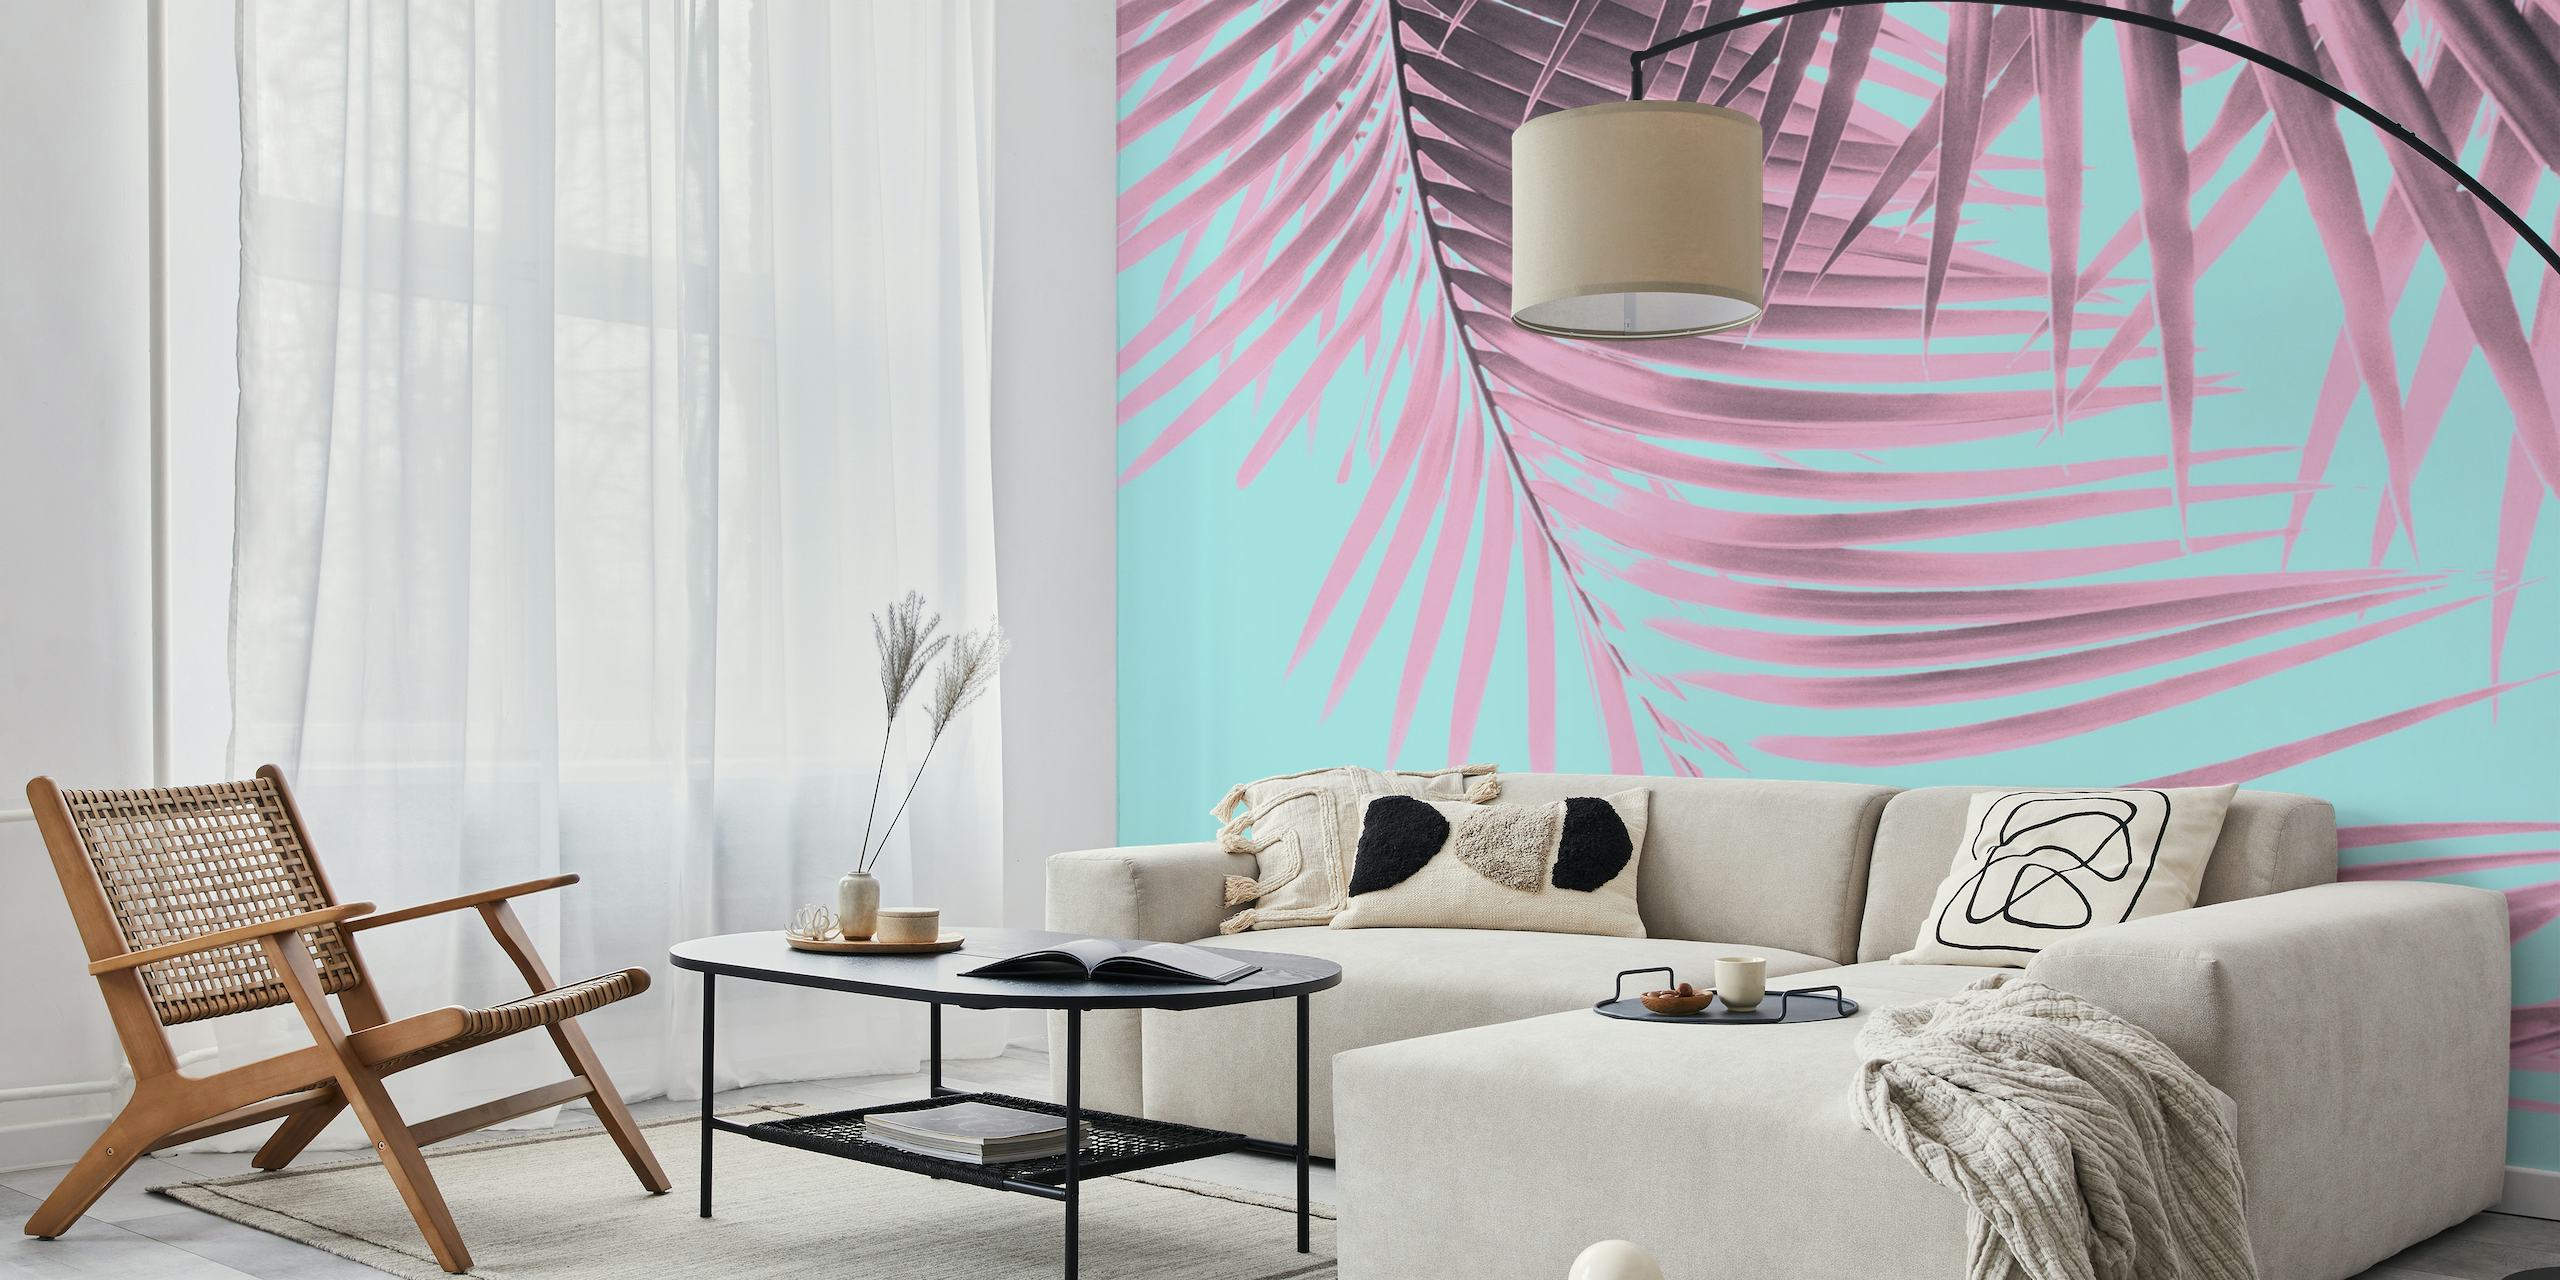 Palm Leaves Summer Vibes 7 wall mural with pink palm leaves on a blue background.